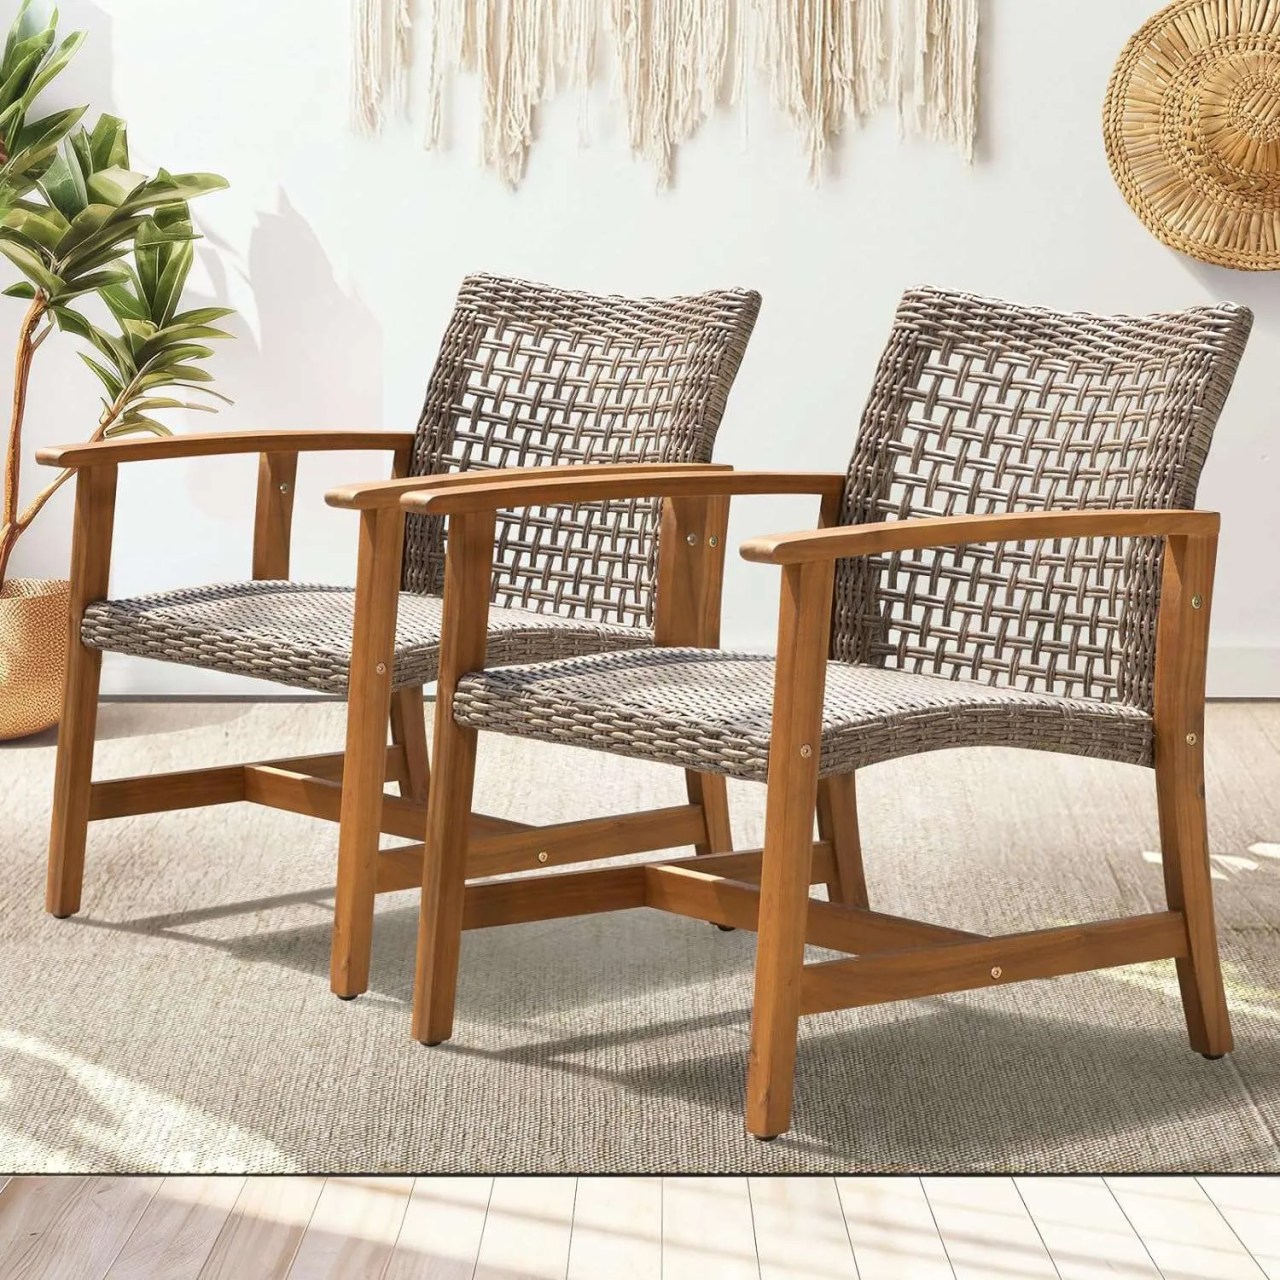 a set of patio chairs with rattan backing